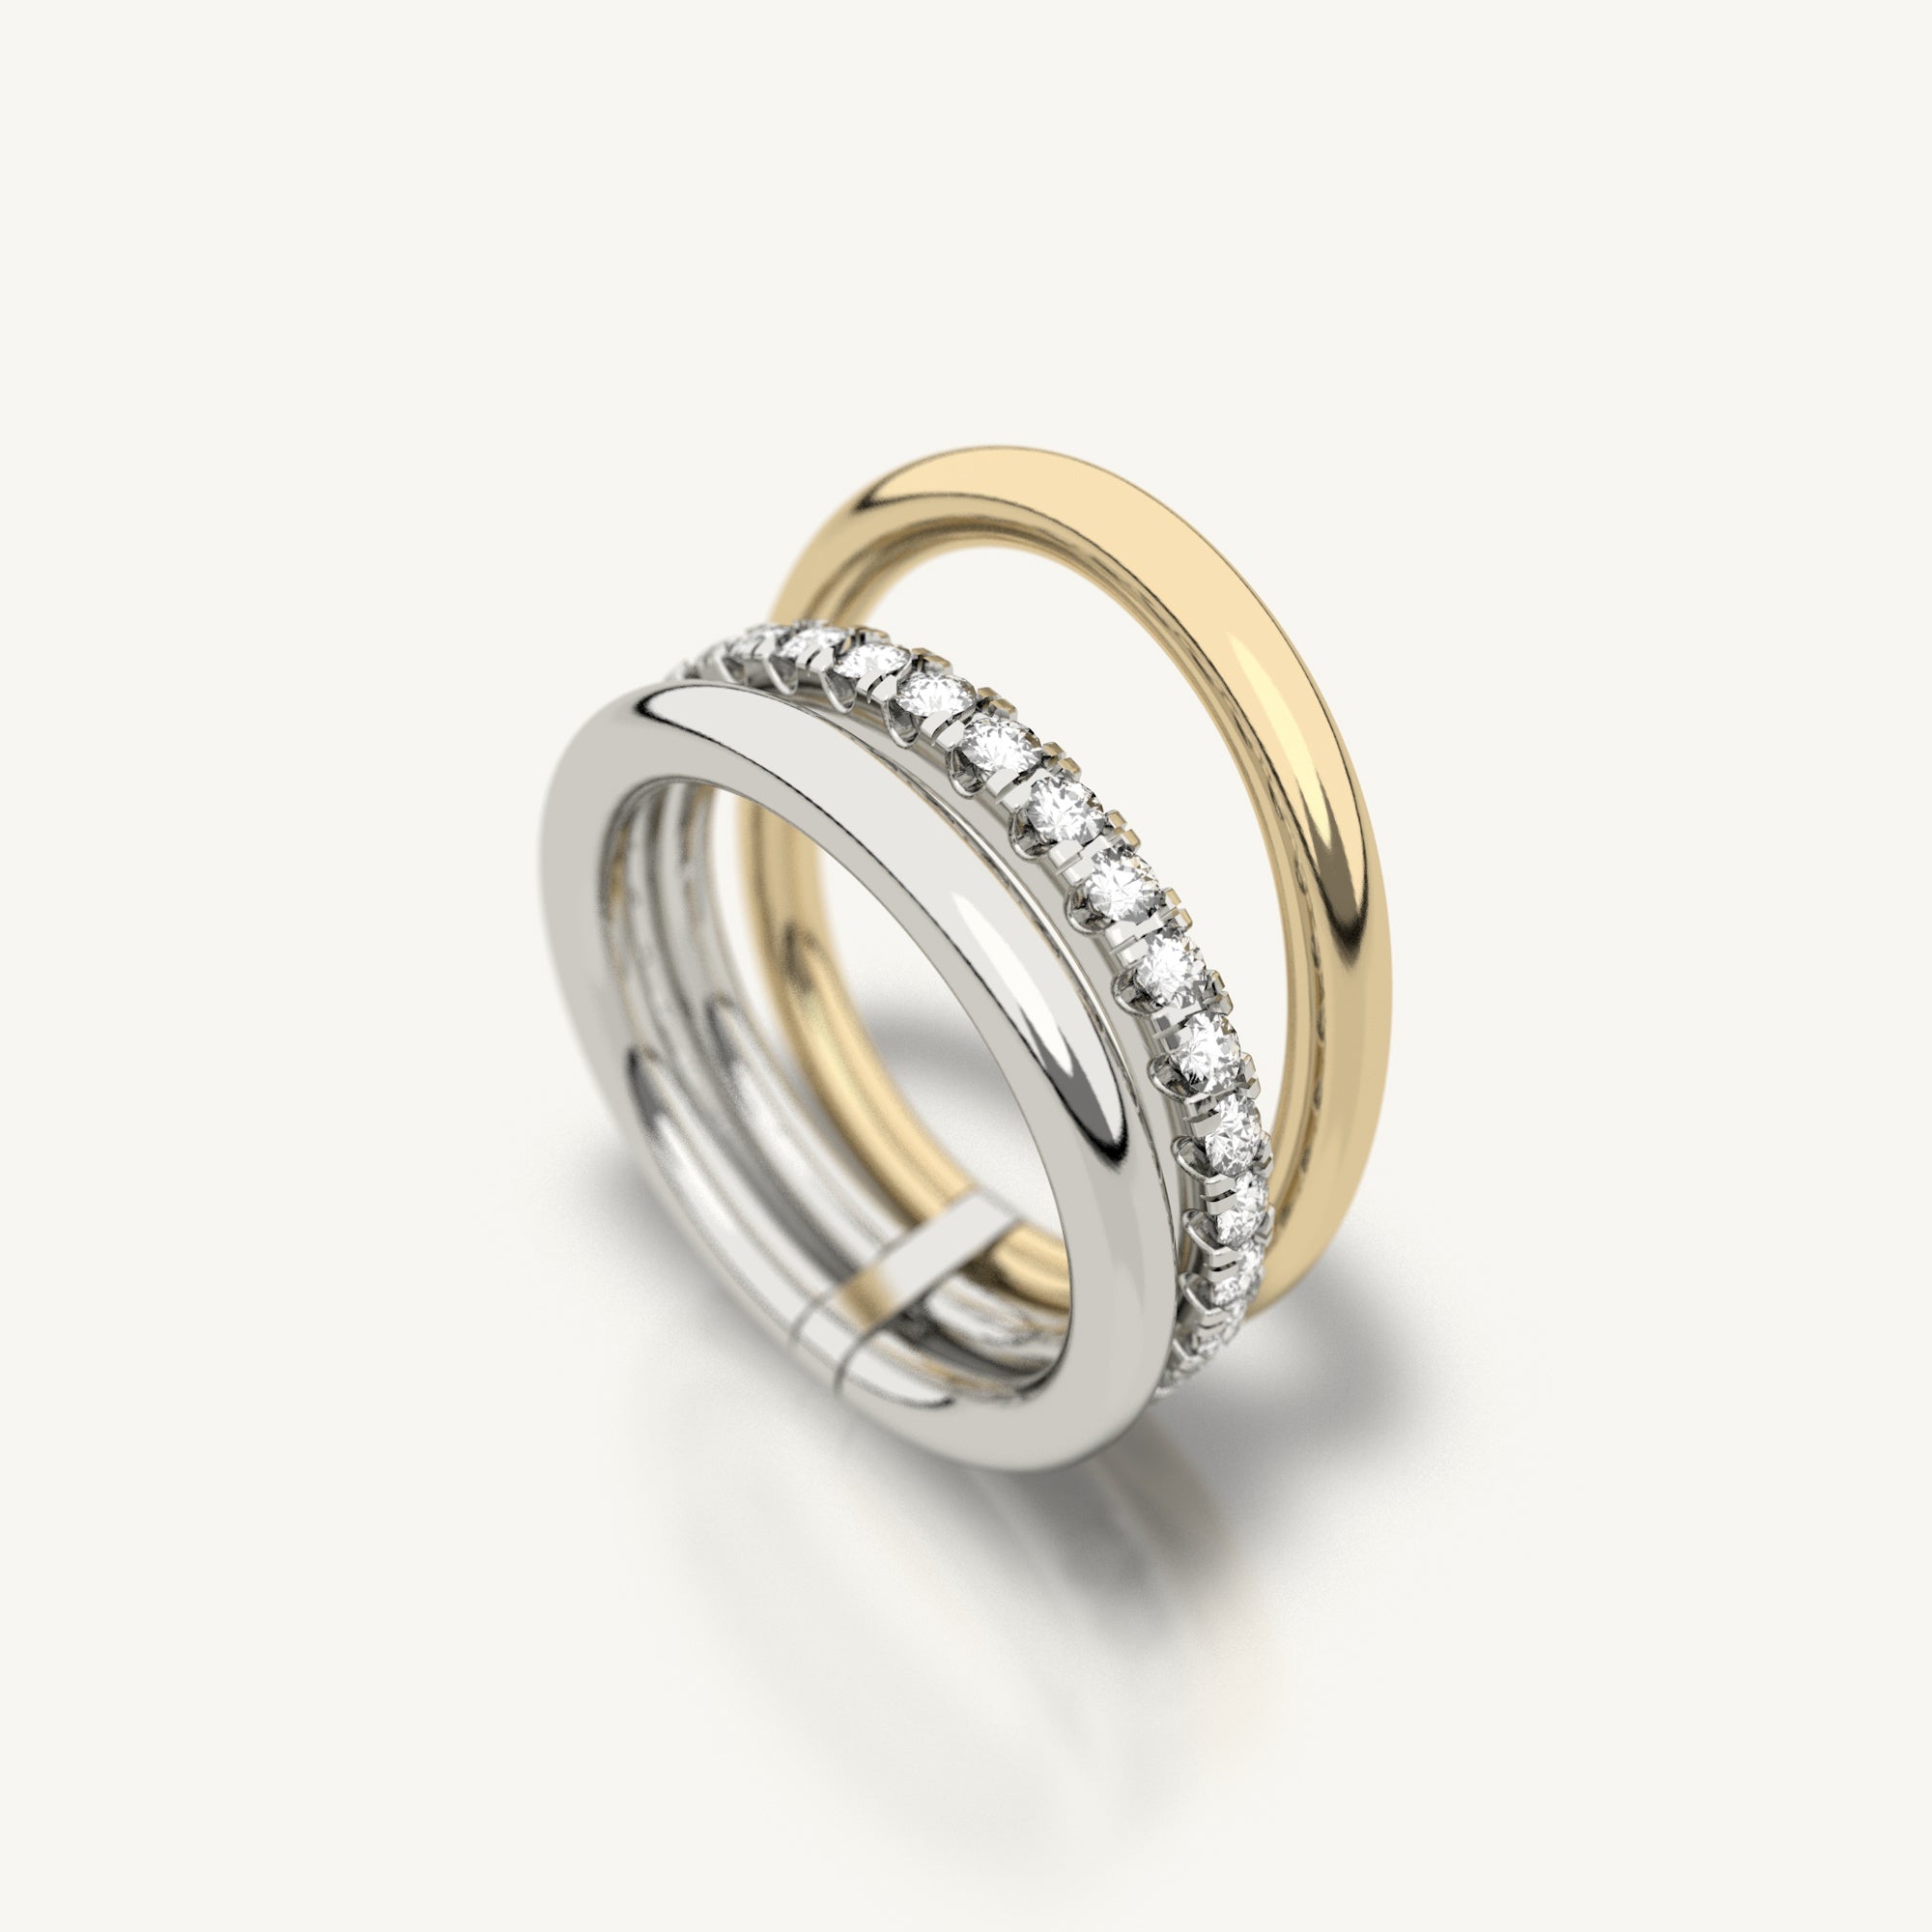 Trio ring from Inacio made from 18k recycled white gold and yellow gold with lab grown diamonds